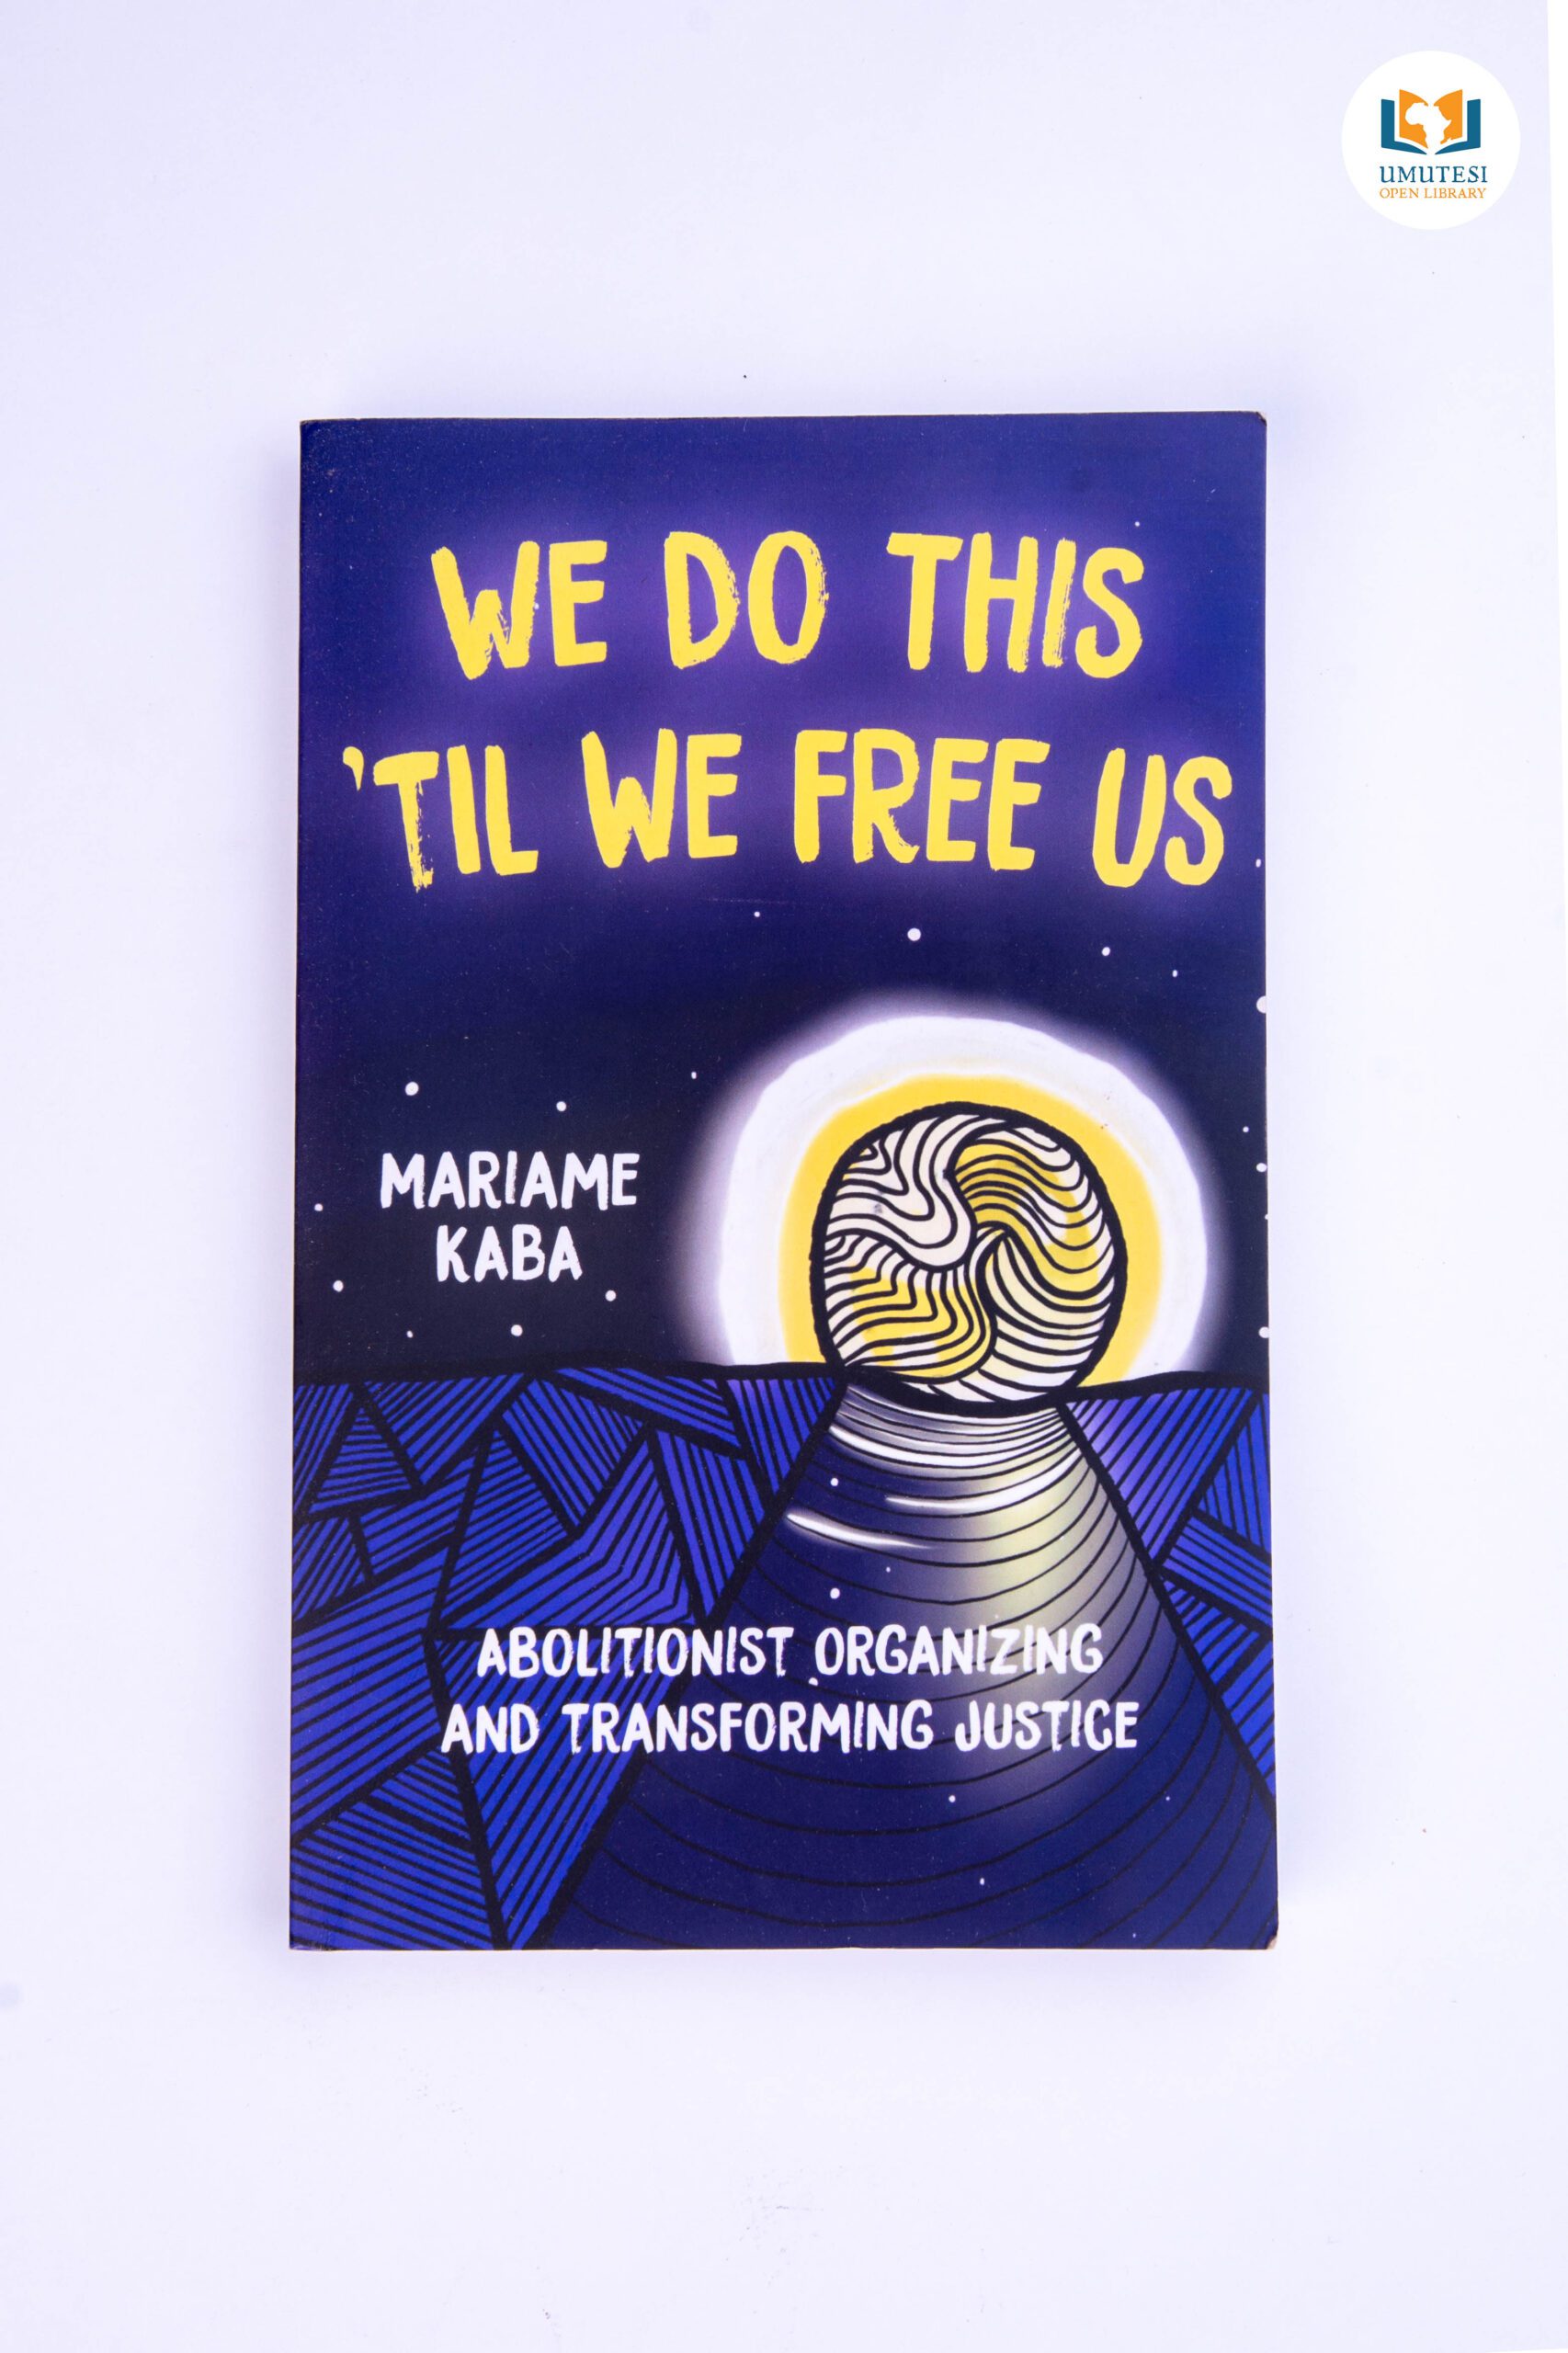 We Do This Til We Free Us by Mariame Kaba